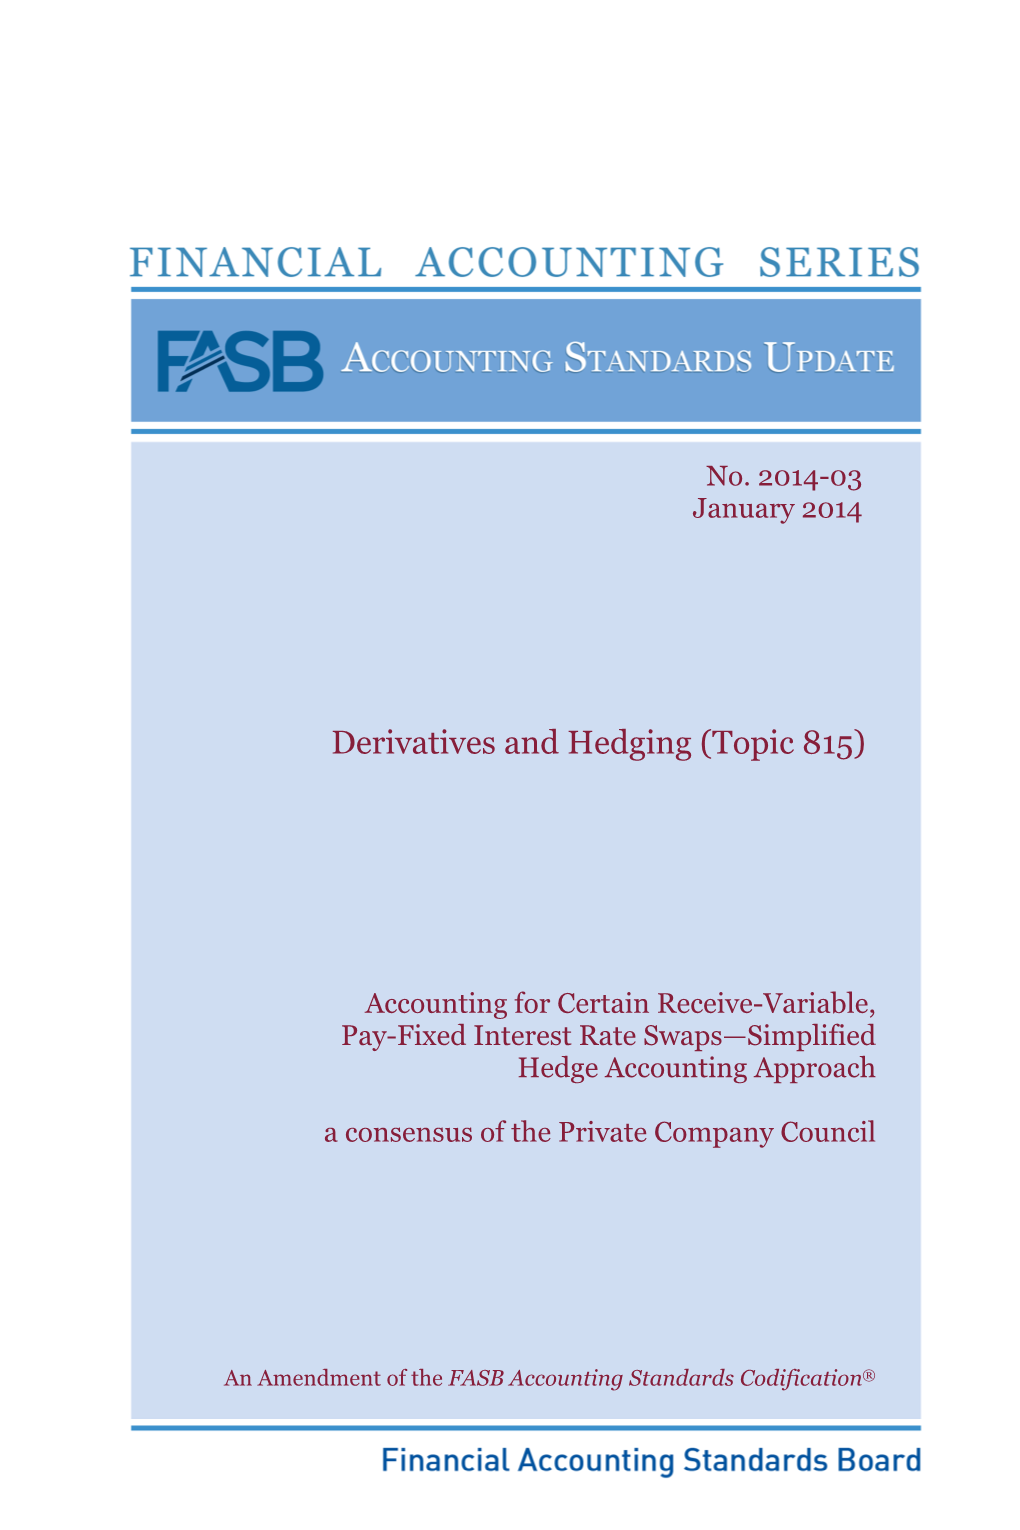 Derivatives and Hedging (Topic 815)